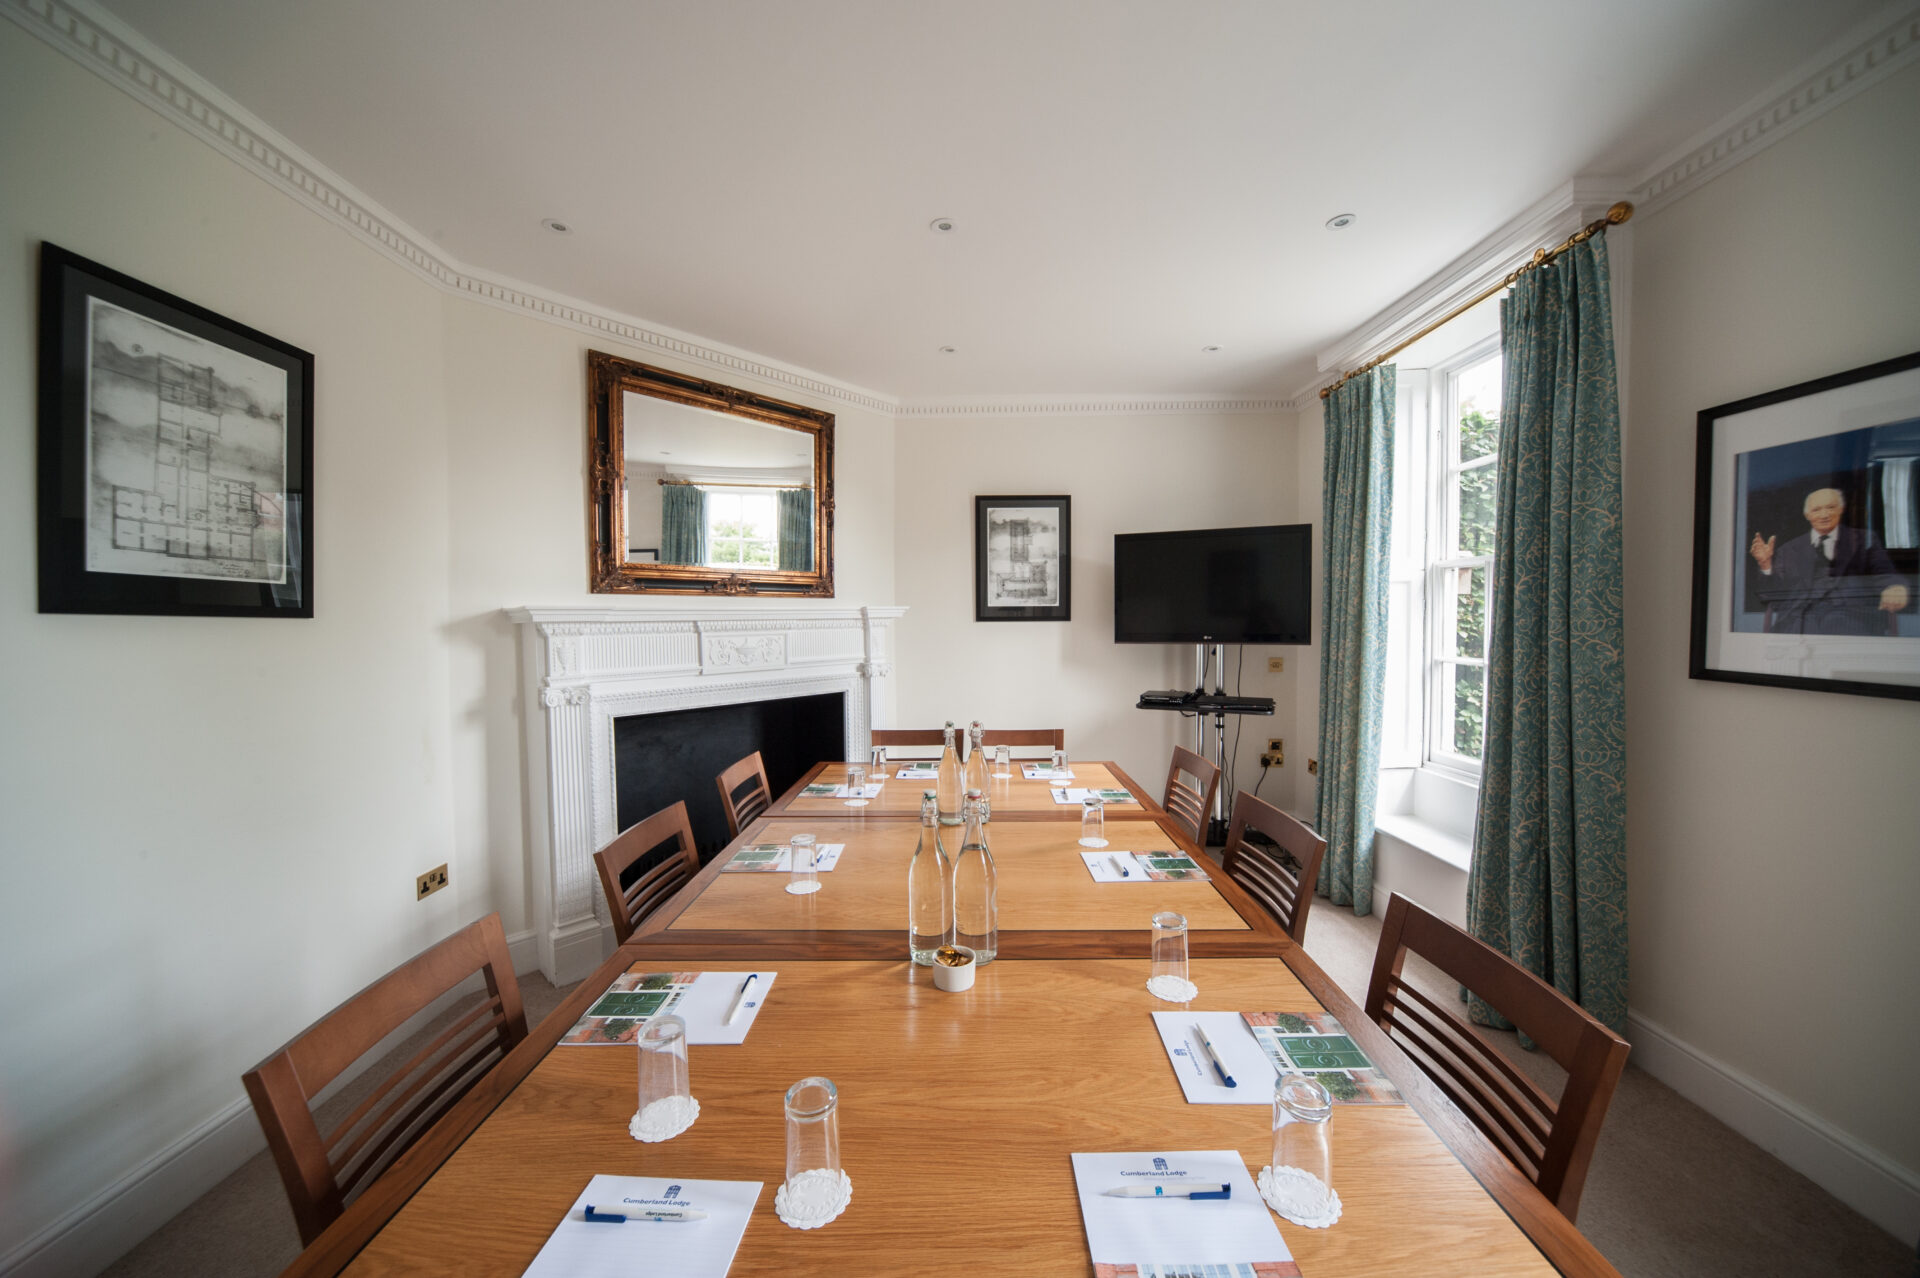 Denning arranged in a boardroom layout